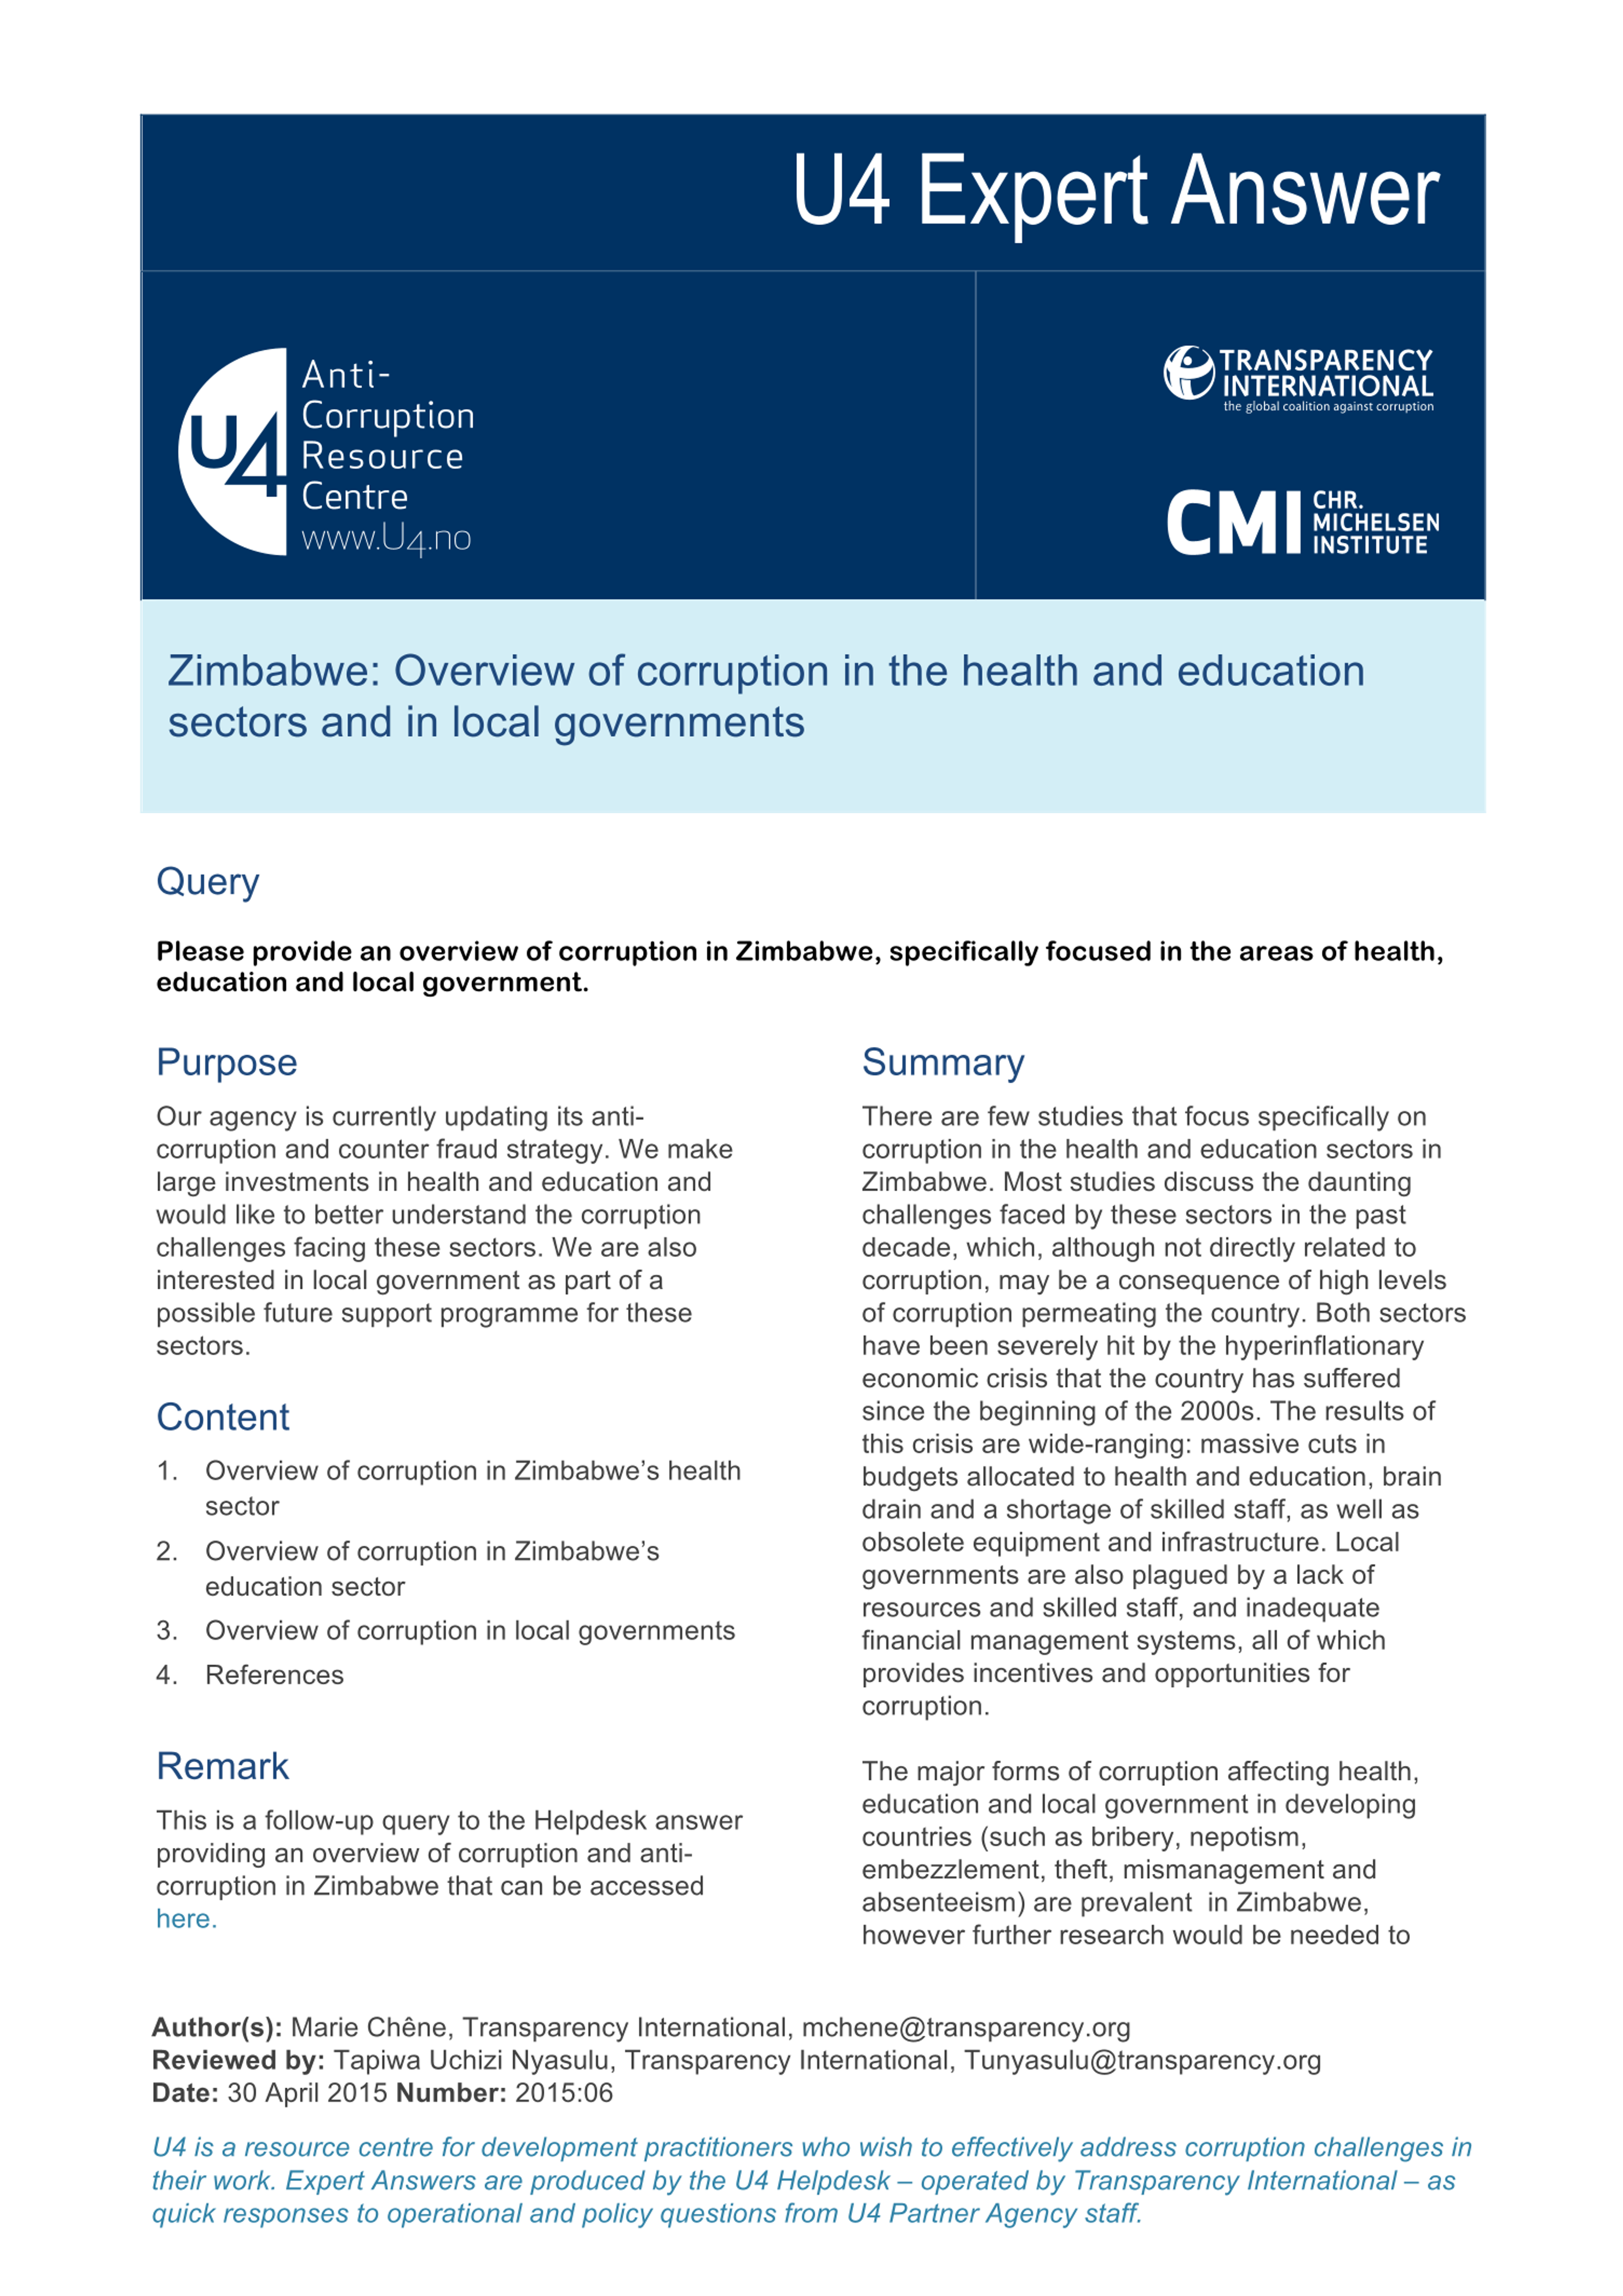 Zimbabwe: Overview of corruption in the health and education sectors and in local governments